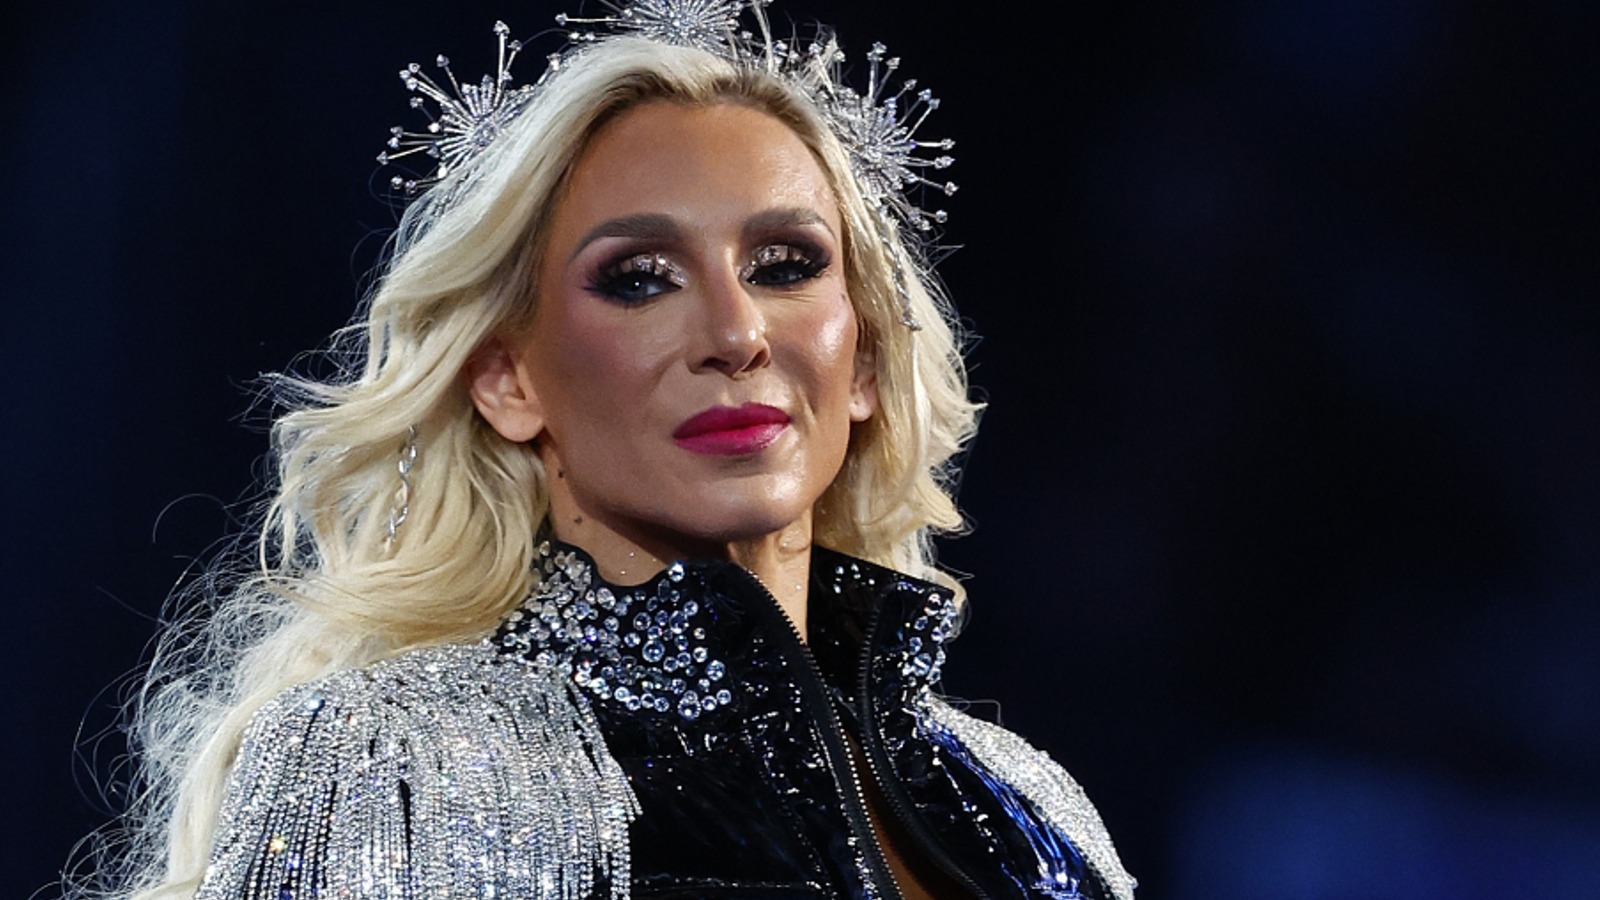 Injured WWE Star Charlotte Flair Shares Performance Center Training Footage